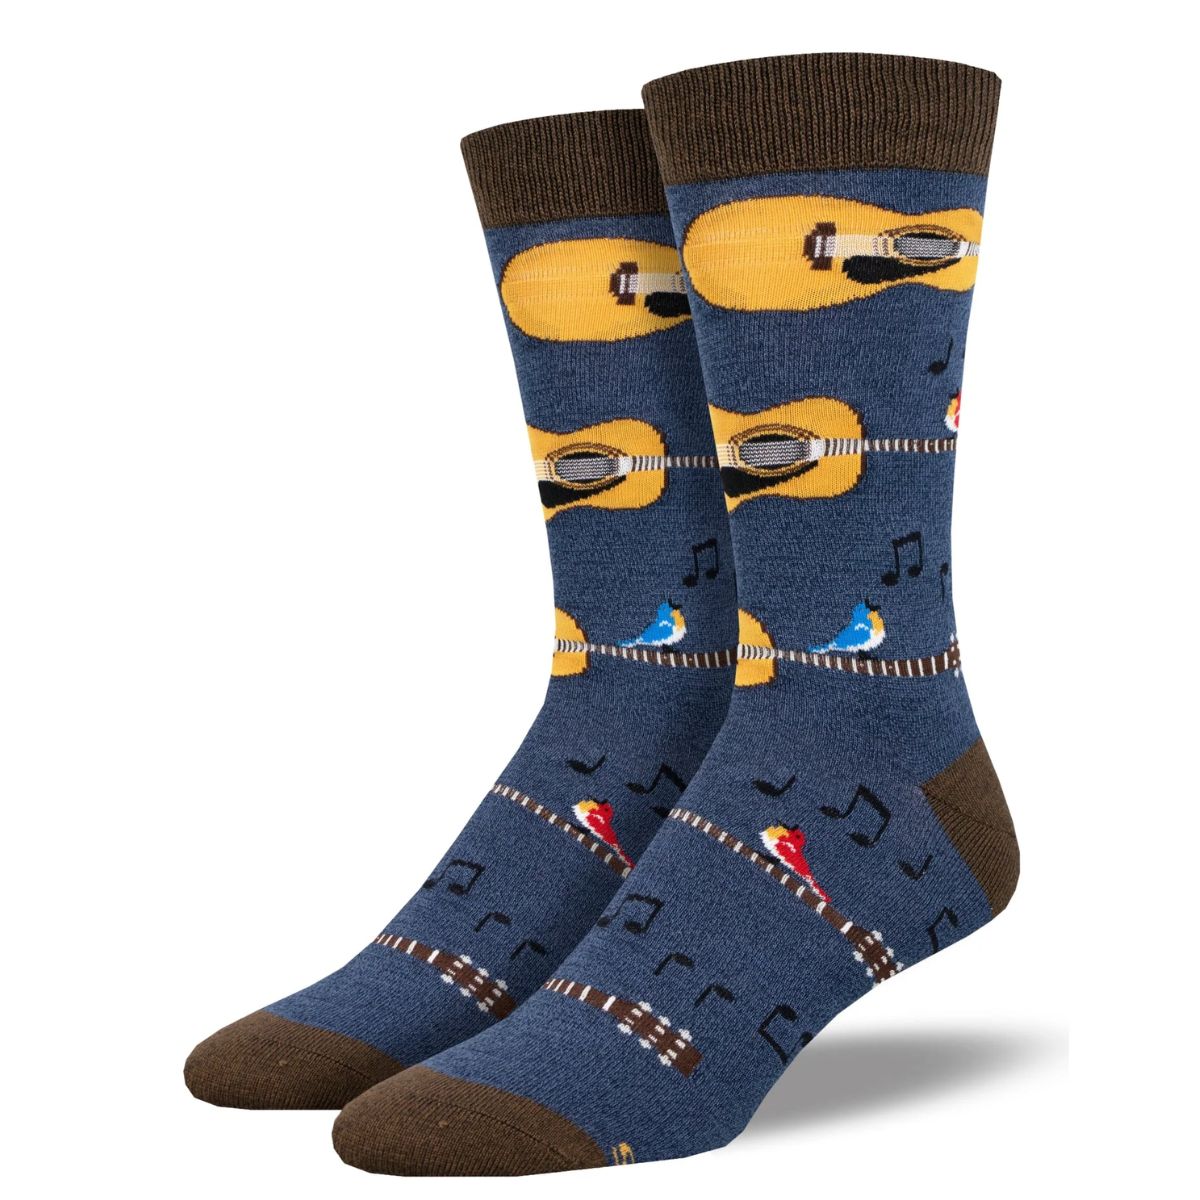 Nice acoustics socks a pair of navy heather blue socks with guitar and music notes print. 